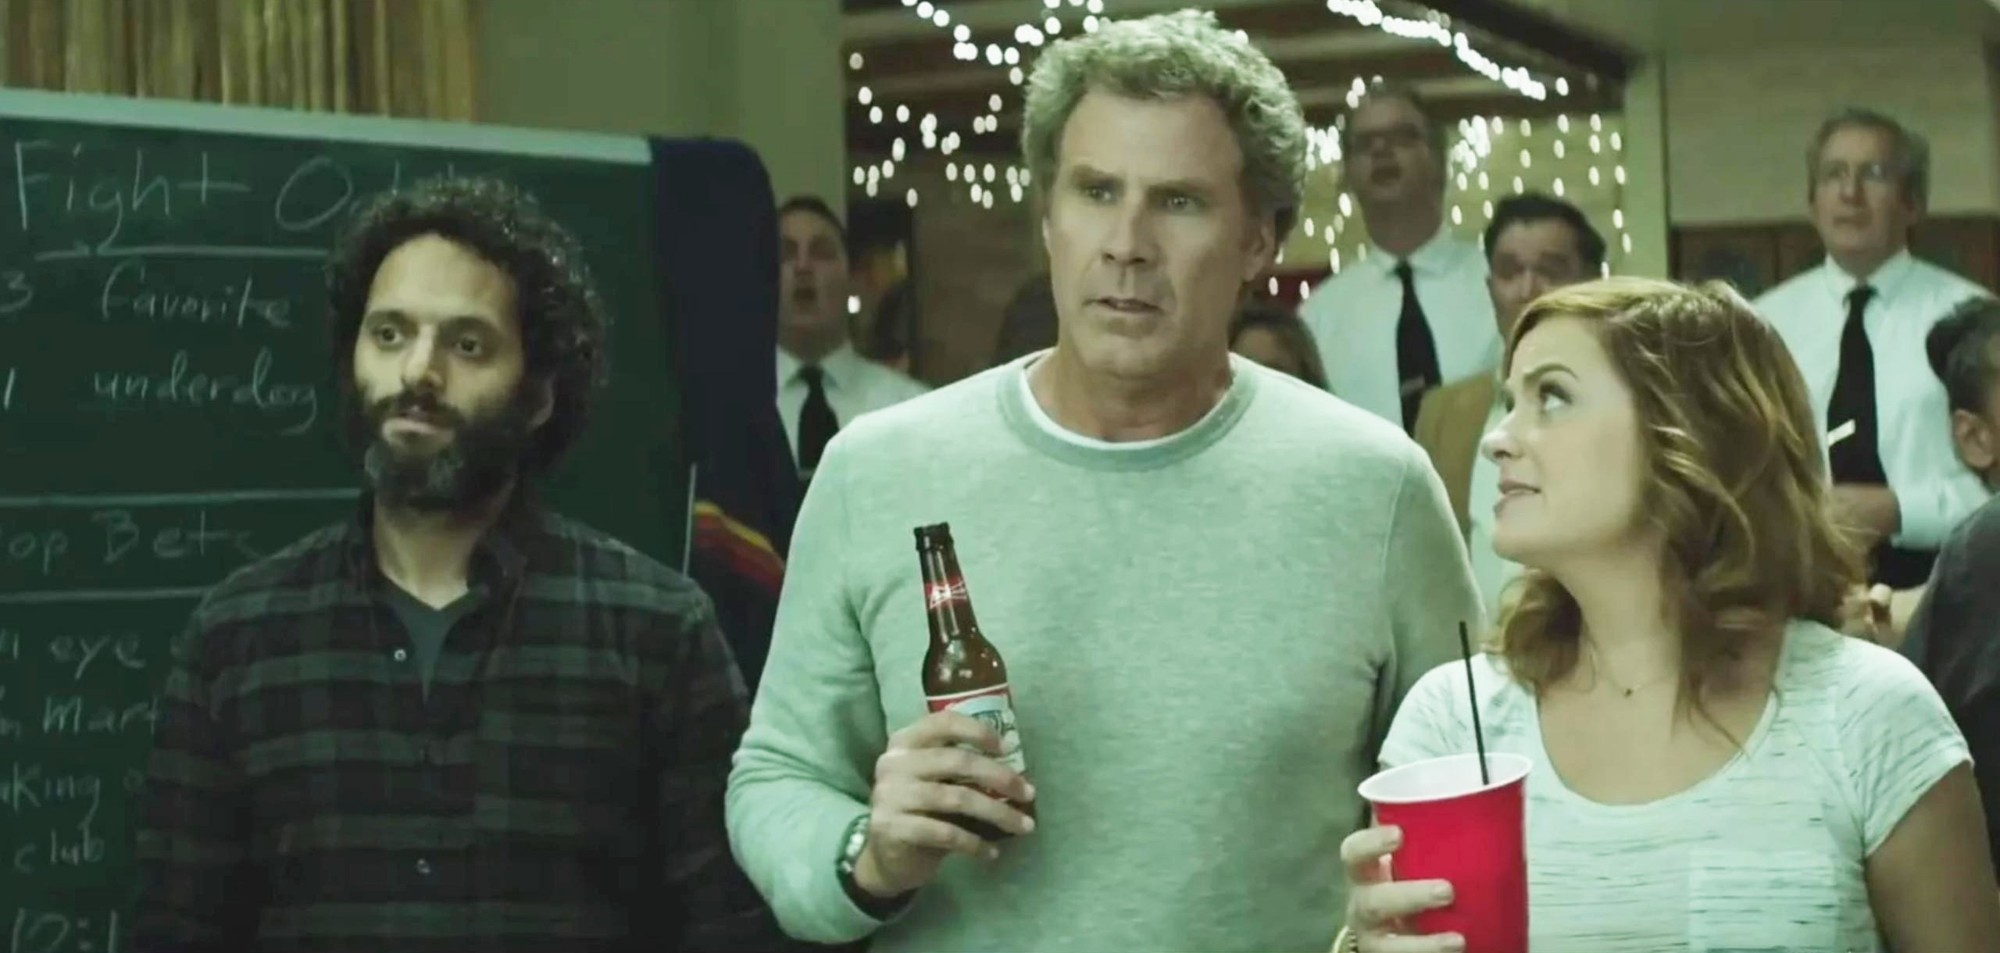 Jason Mantzoukas, Will Ferrell and Amy Poehler in Warner Bros. Pictures' The House (2017)